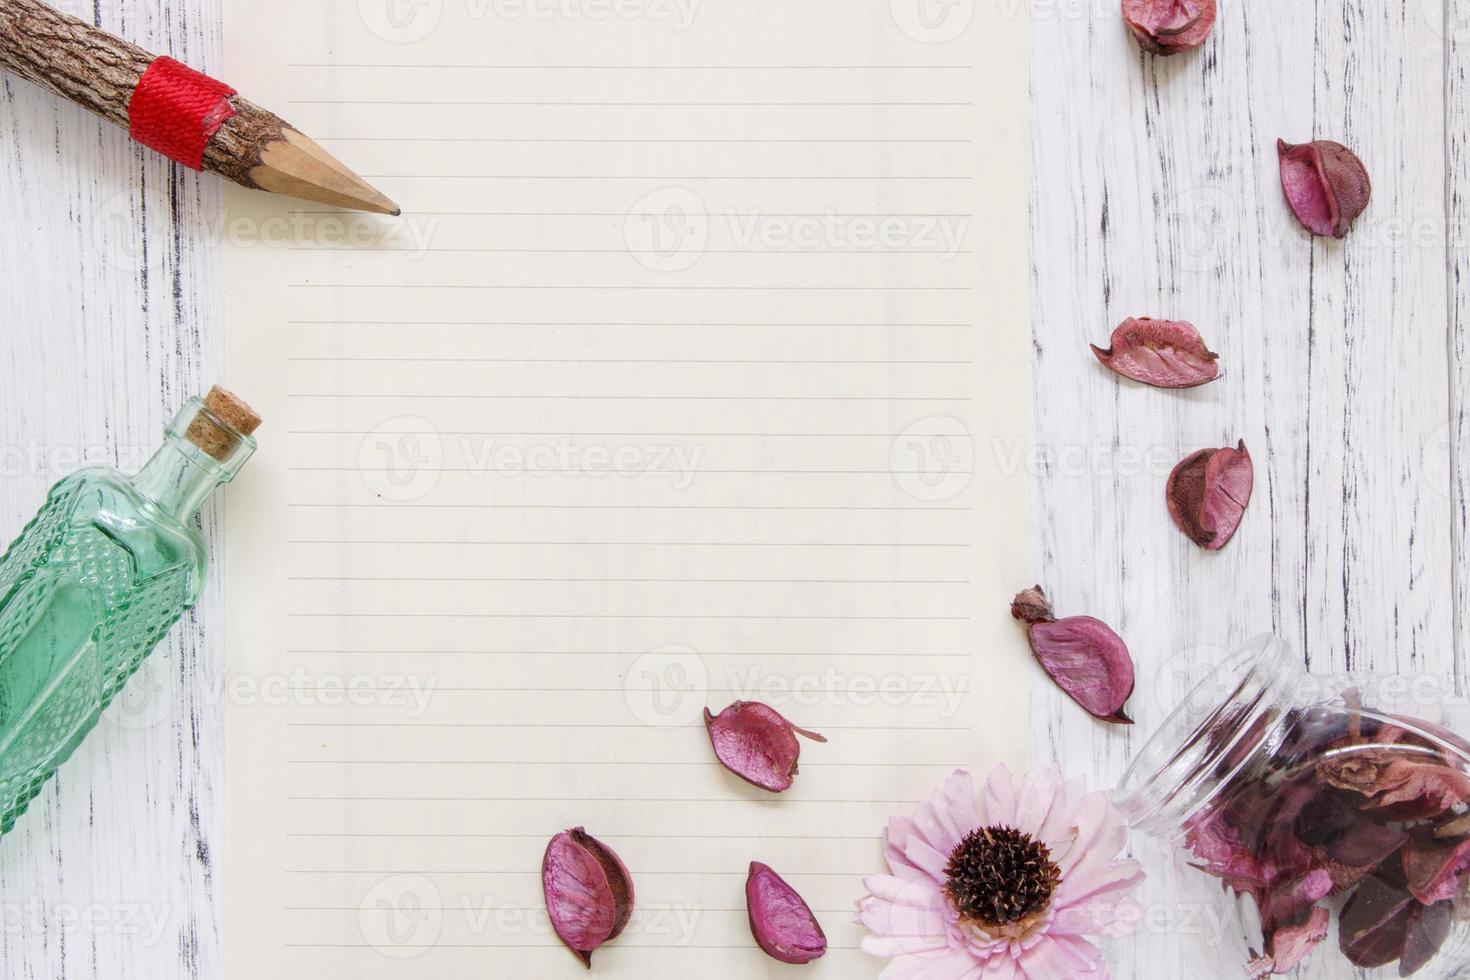 Paper with petals, pencil and bottle photo